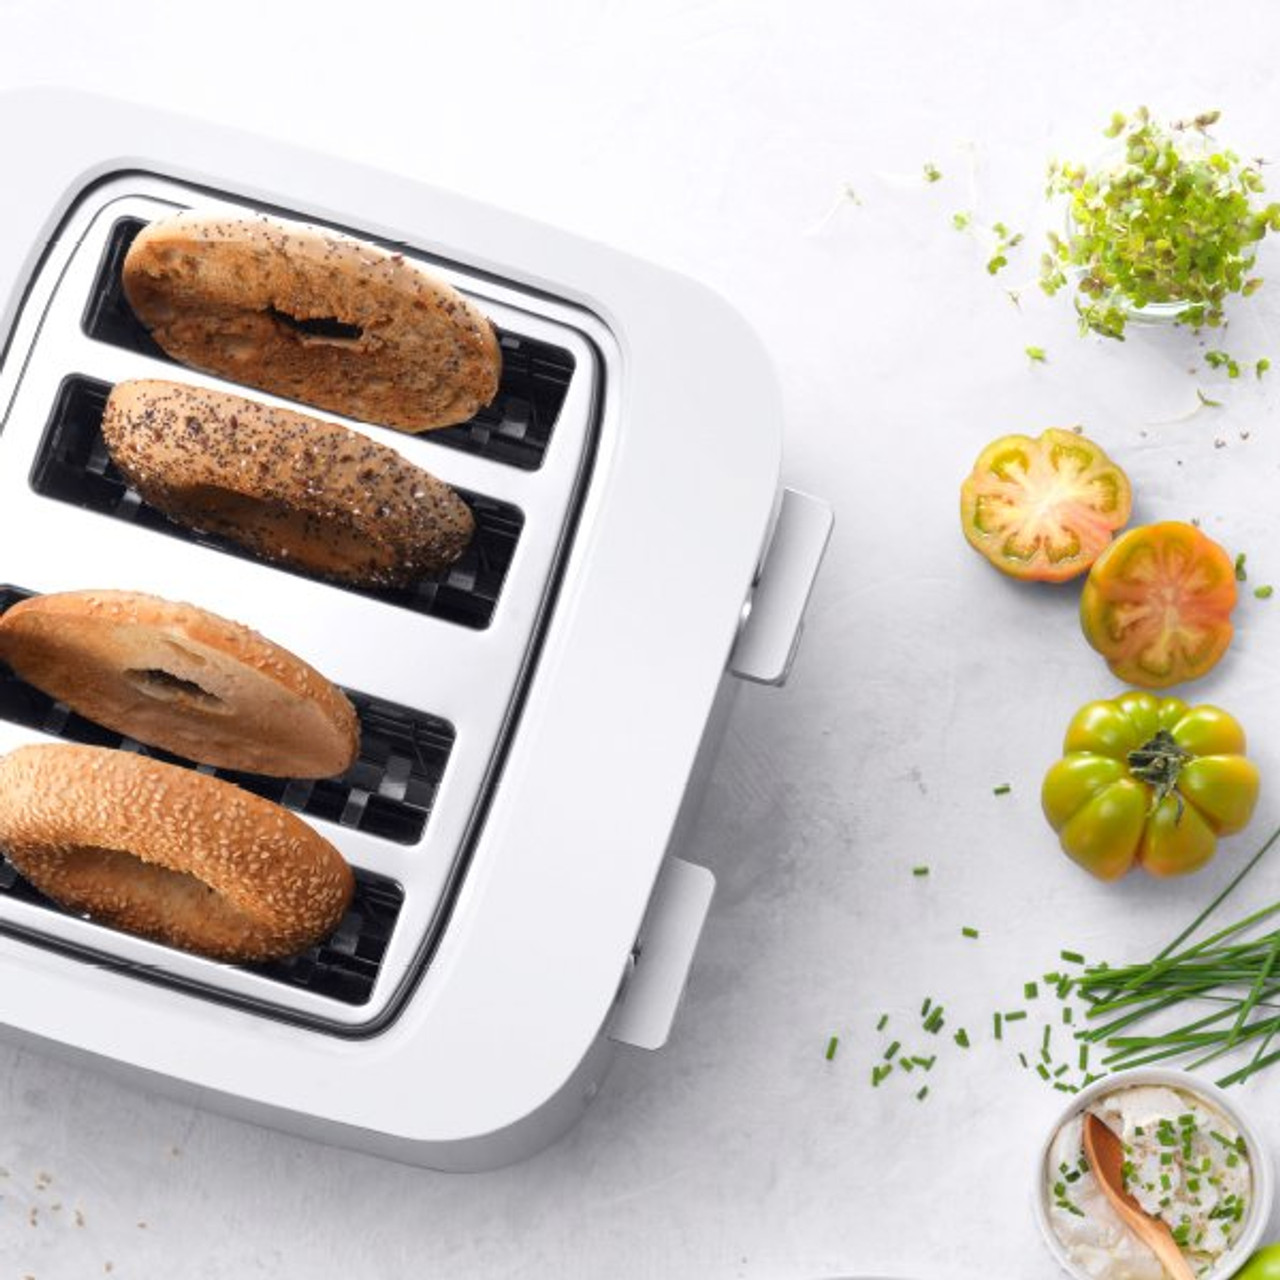 https://cdn11.bigcommerce.com/s-hccytny0od/images/stencil/1280x1280/products/3660/13050/zwilling-enfinigy-4slot-toaster-1__50837.1603355377.jpg?c=2?imbypass=on